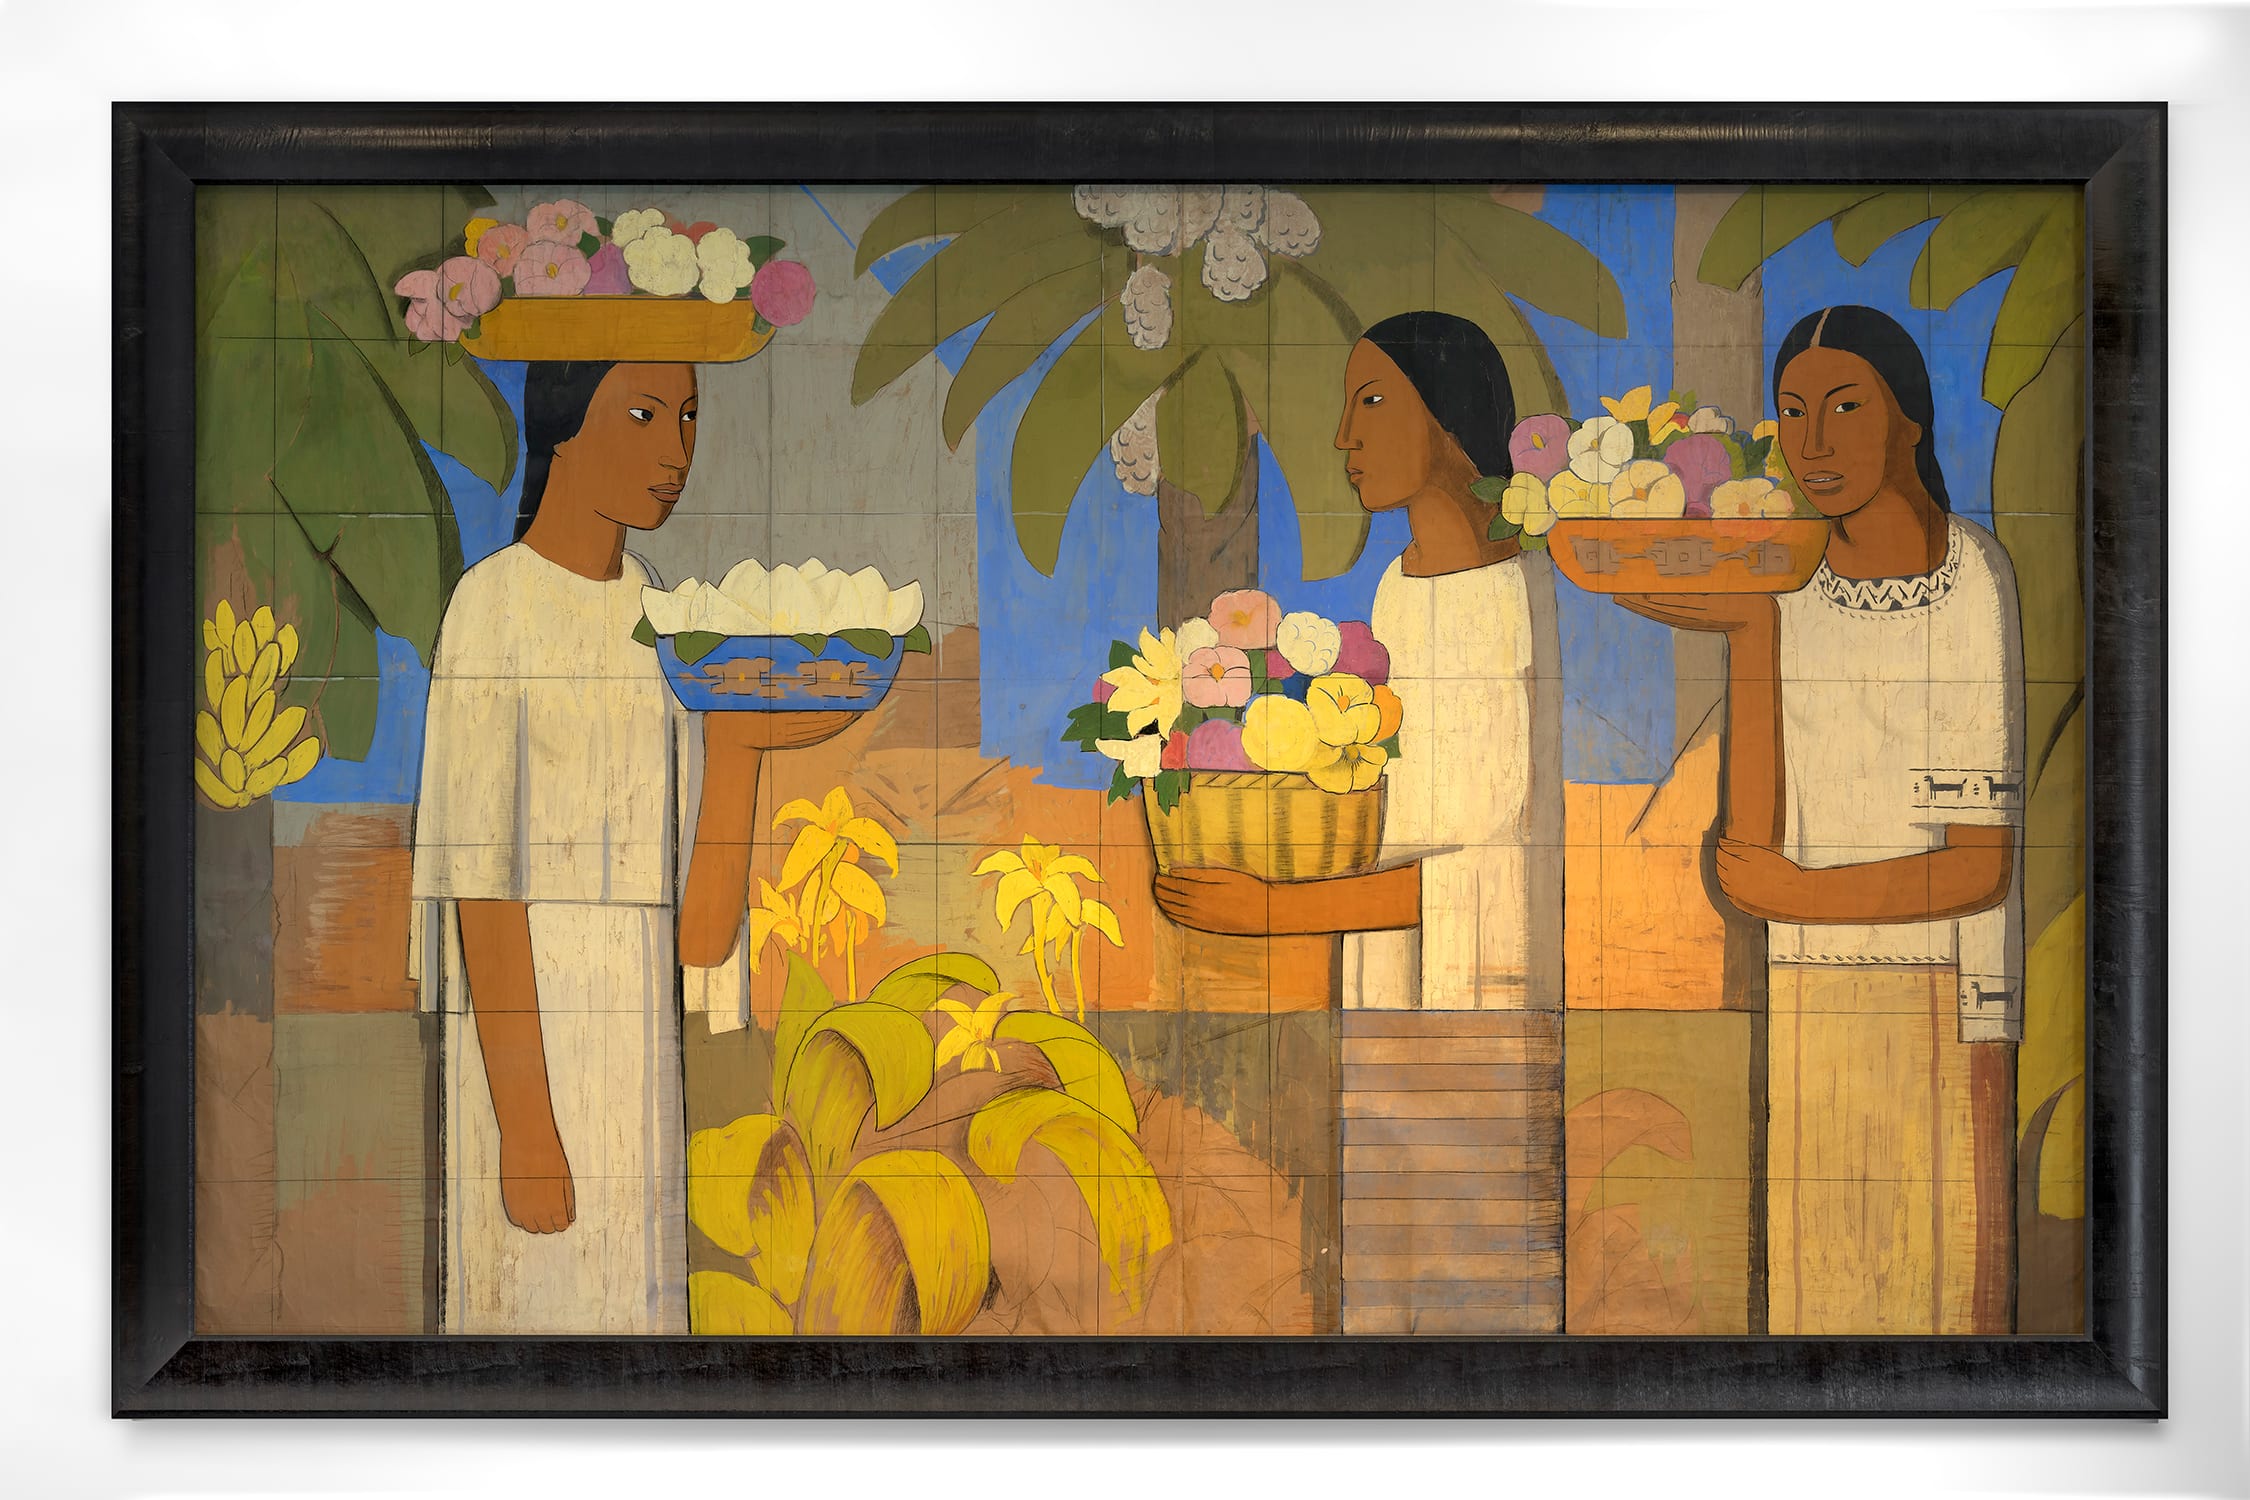 Alfredo Ramos Martínez, Mural Study (Vendedoras de Flores), c. 1936. © The Alfredo Ramos Martínez Research Project. Courtesy of Louis Stern Fine Arts, West Hollywood. Photo by Gene Ogami.